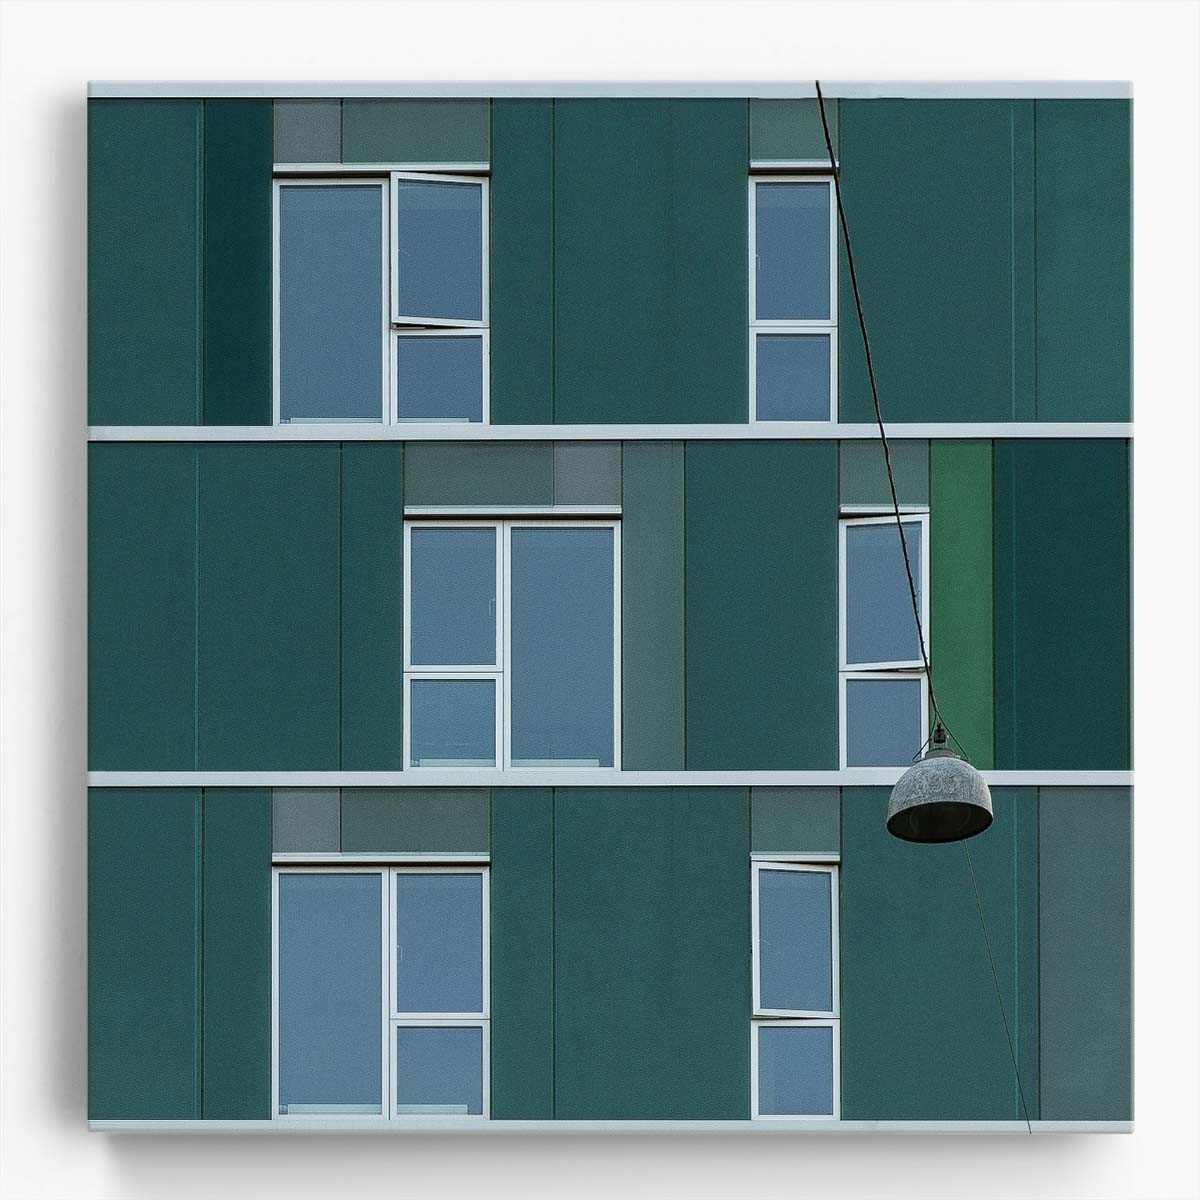 Minimalist Abstract Architecture & Street Lamp Wall Art by Luxuriance Designs. Made in USA.